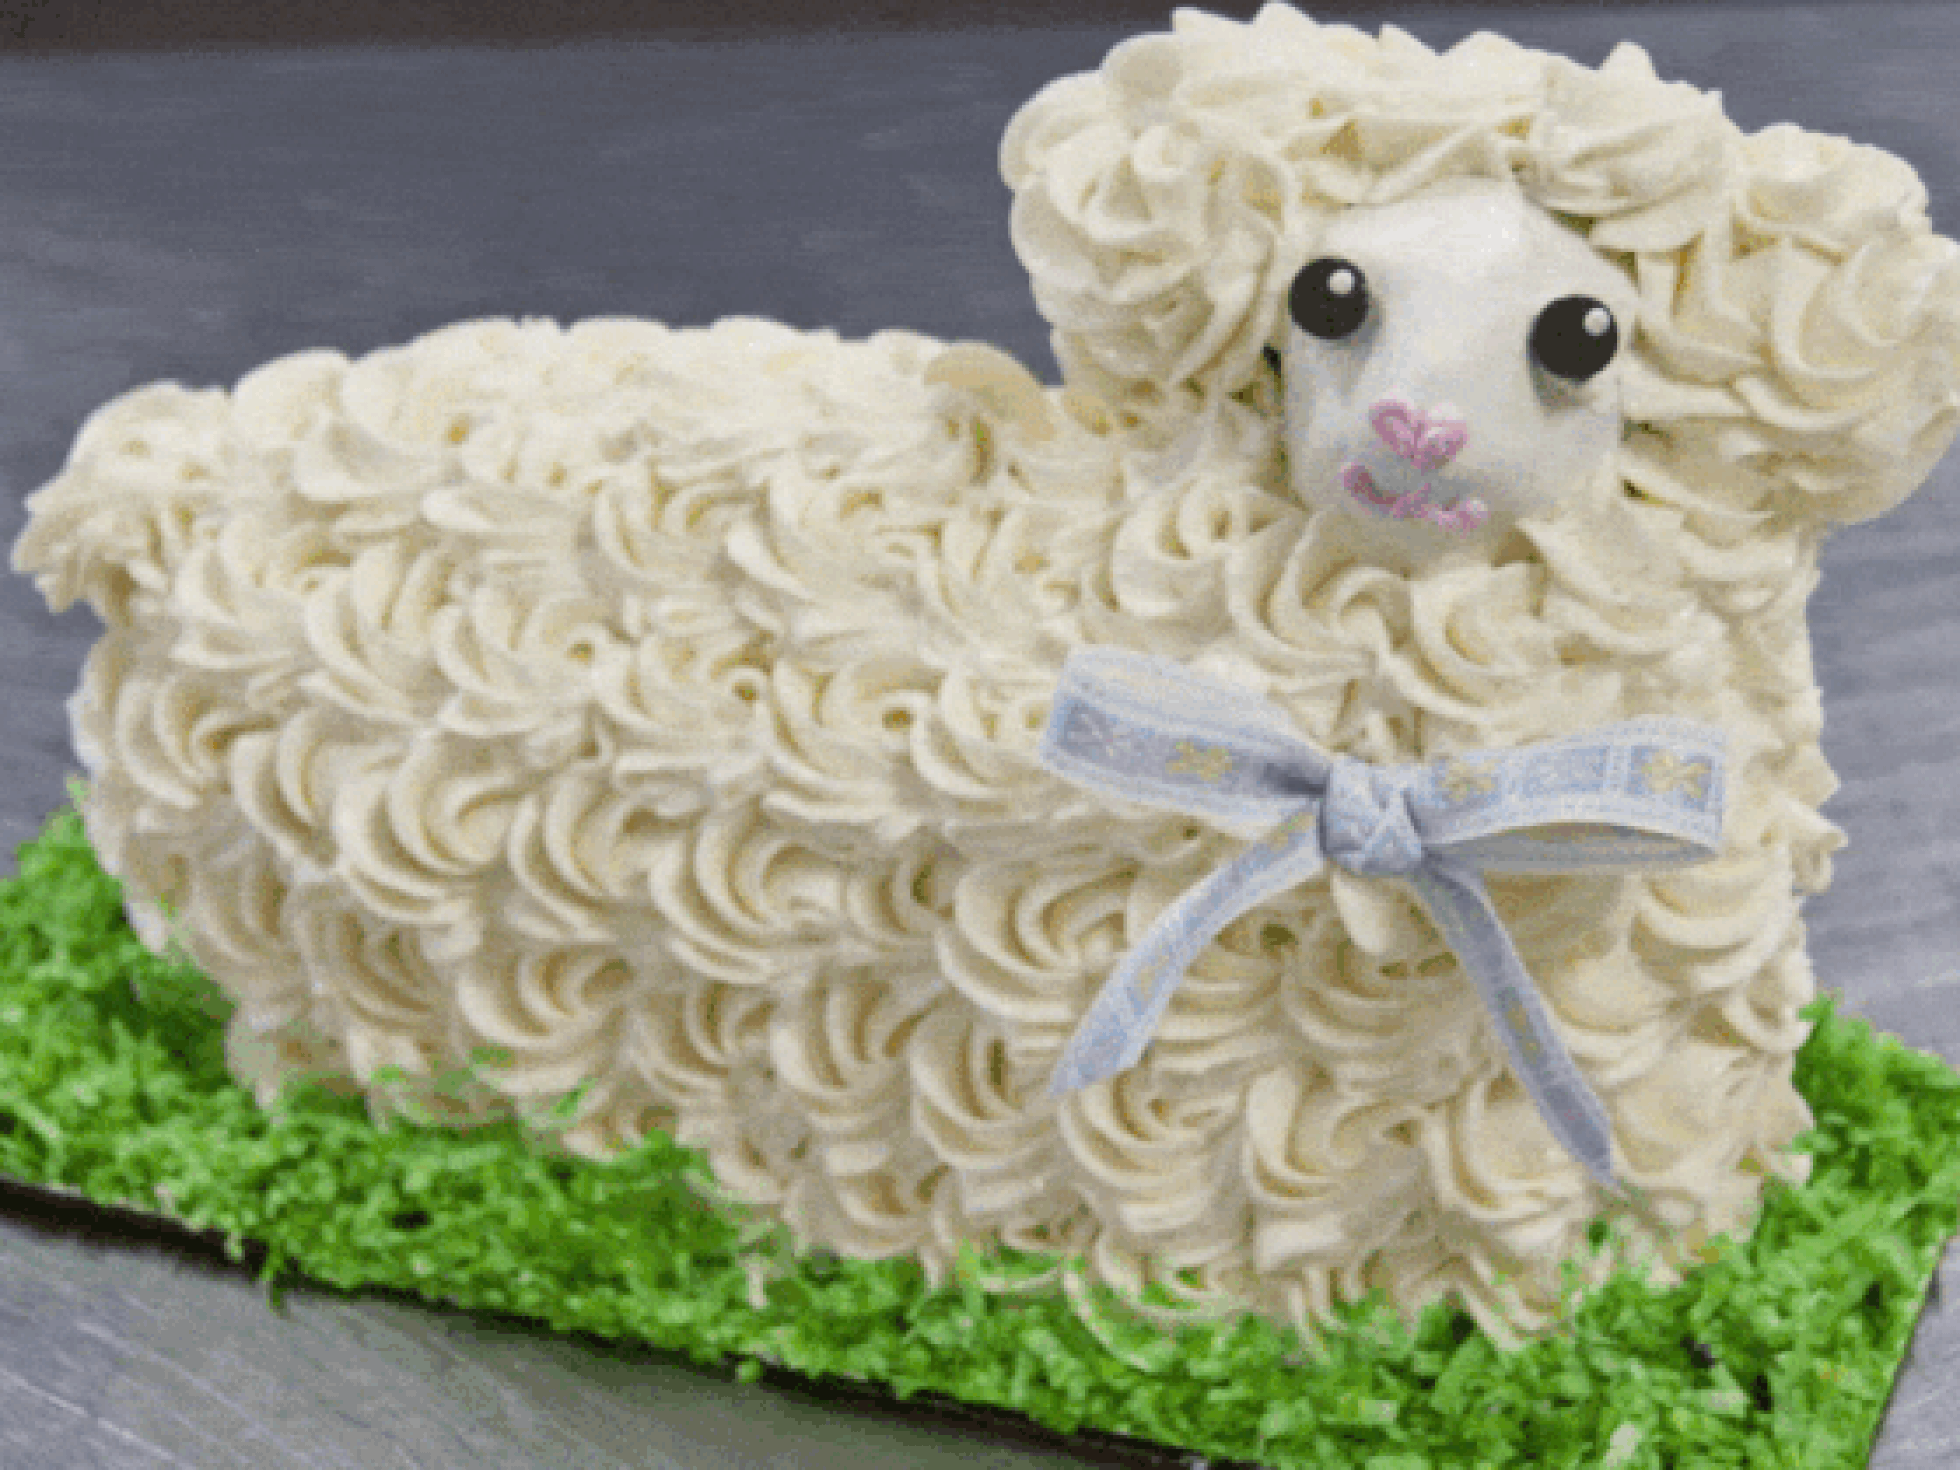 Lamb cakes: The Easter dessert that will give you nightmares | Culture | EL  PAÍS English Edition